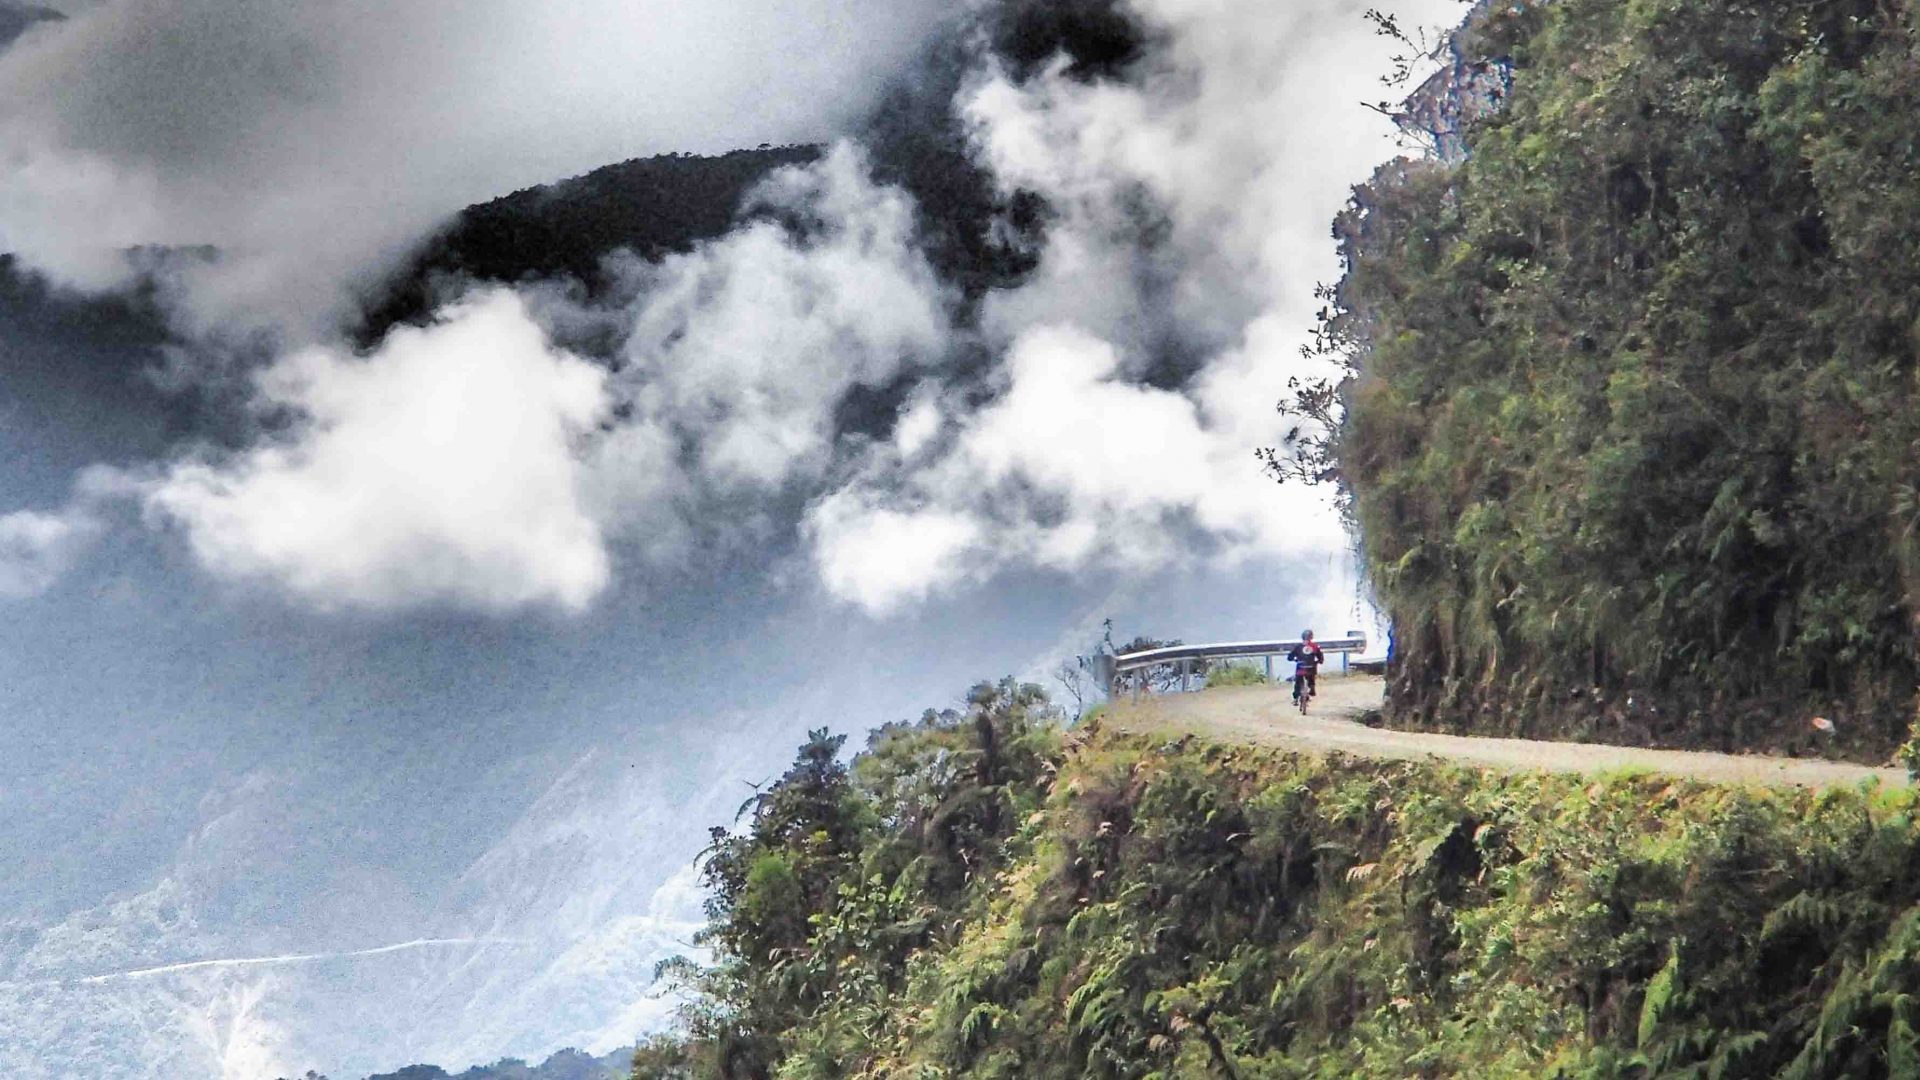 A cyclist tackles the awe-inspiring and fear-inducing terrain of Bolivia's Death Road.